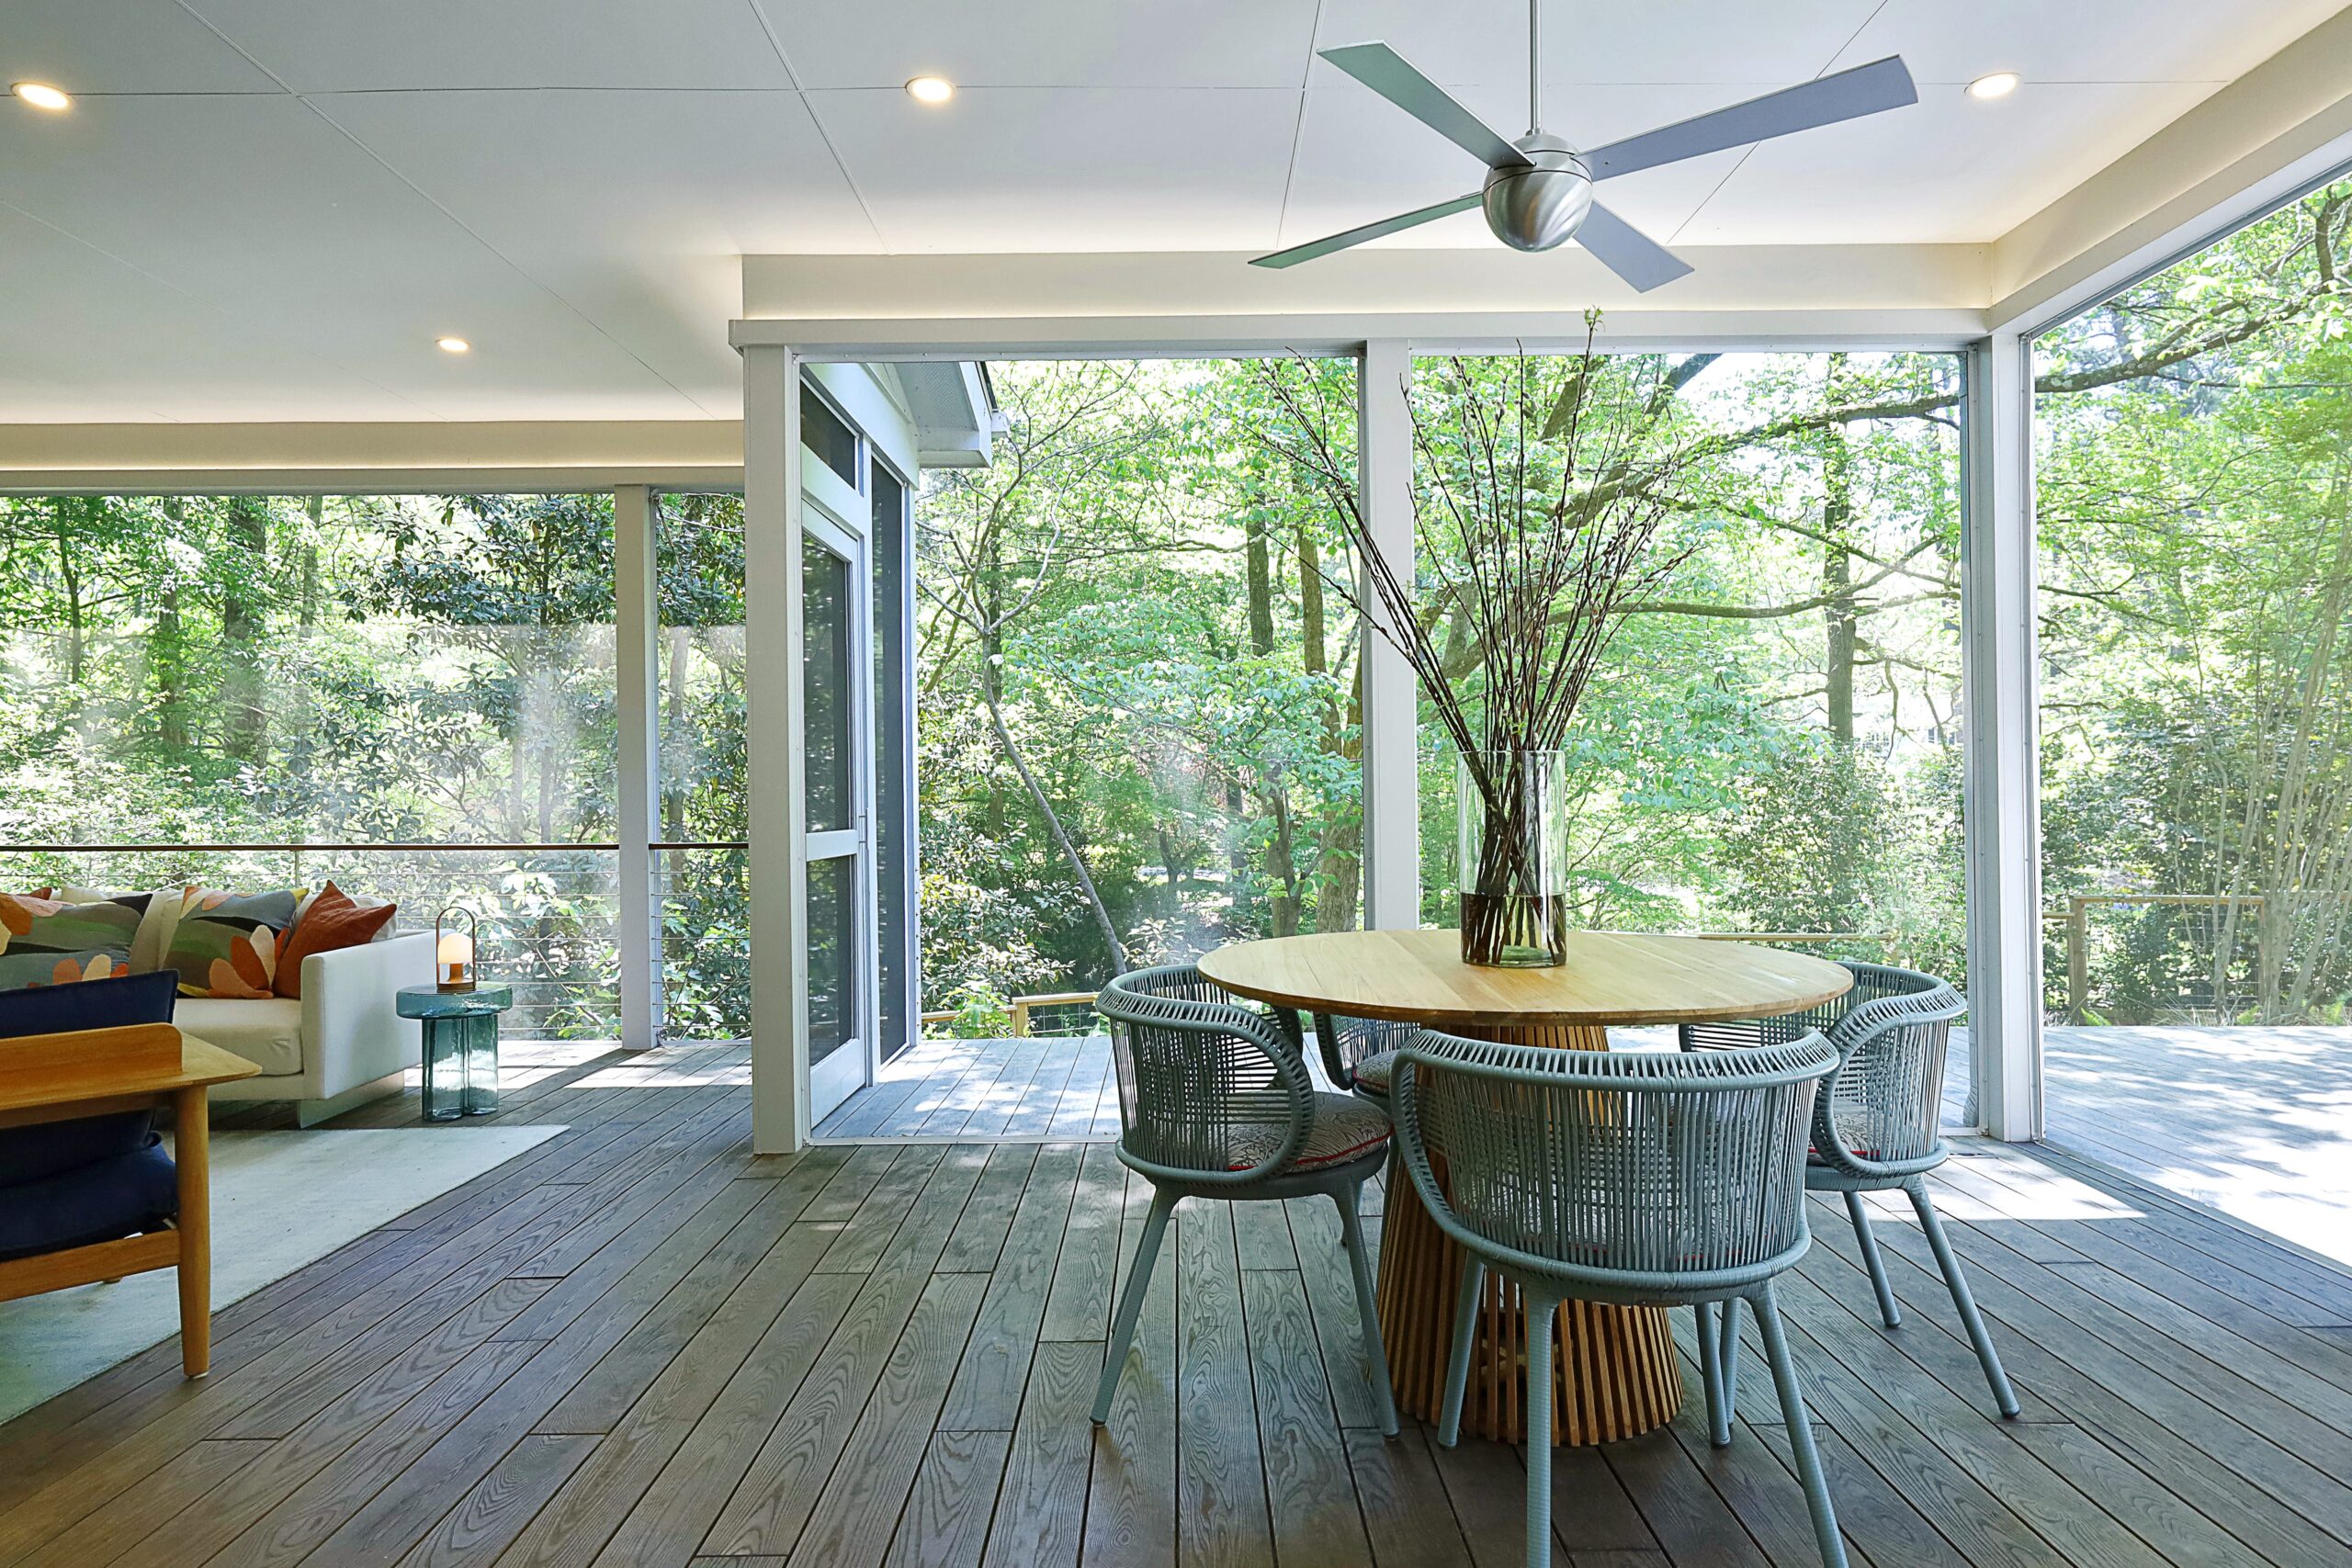 Wood flooring in the porch continues to the open deck past the floor-to-ceiling screens, crating the illusion of an unobstructed connection to the outdoors.